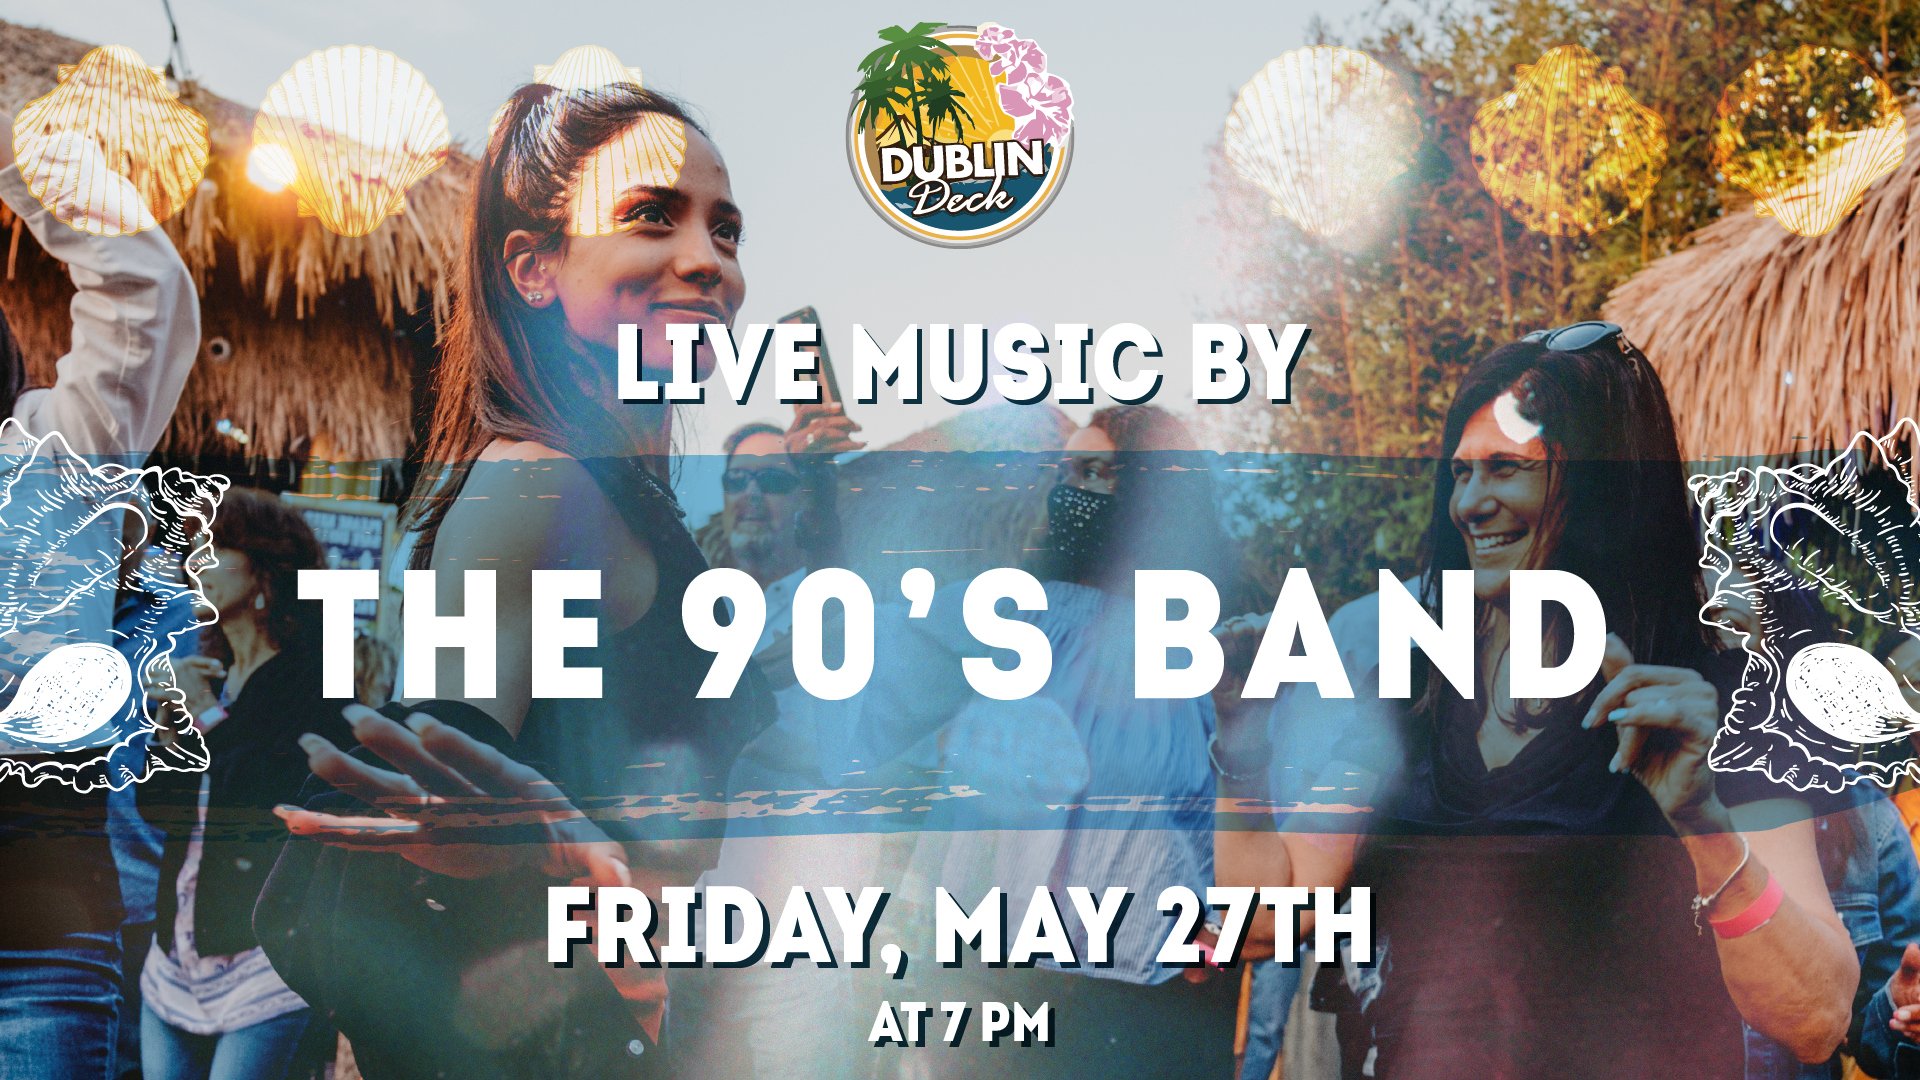 Ge the weekend started with The 90's Band at Dublin Deck! Music starts at 7PM